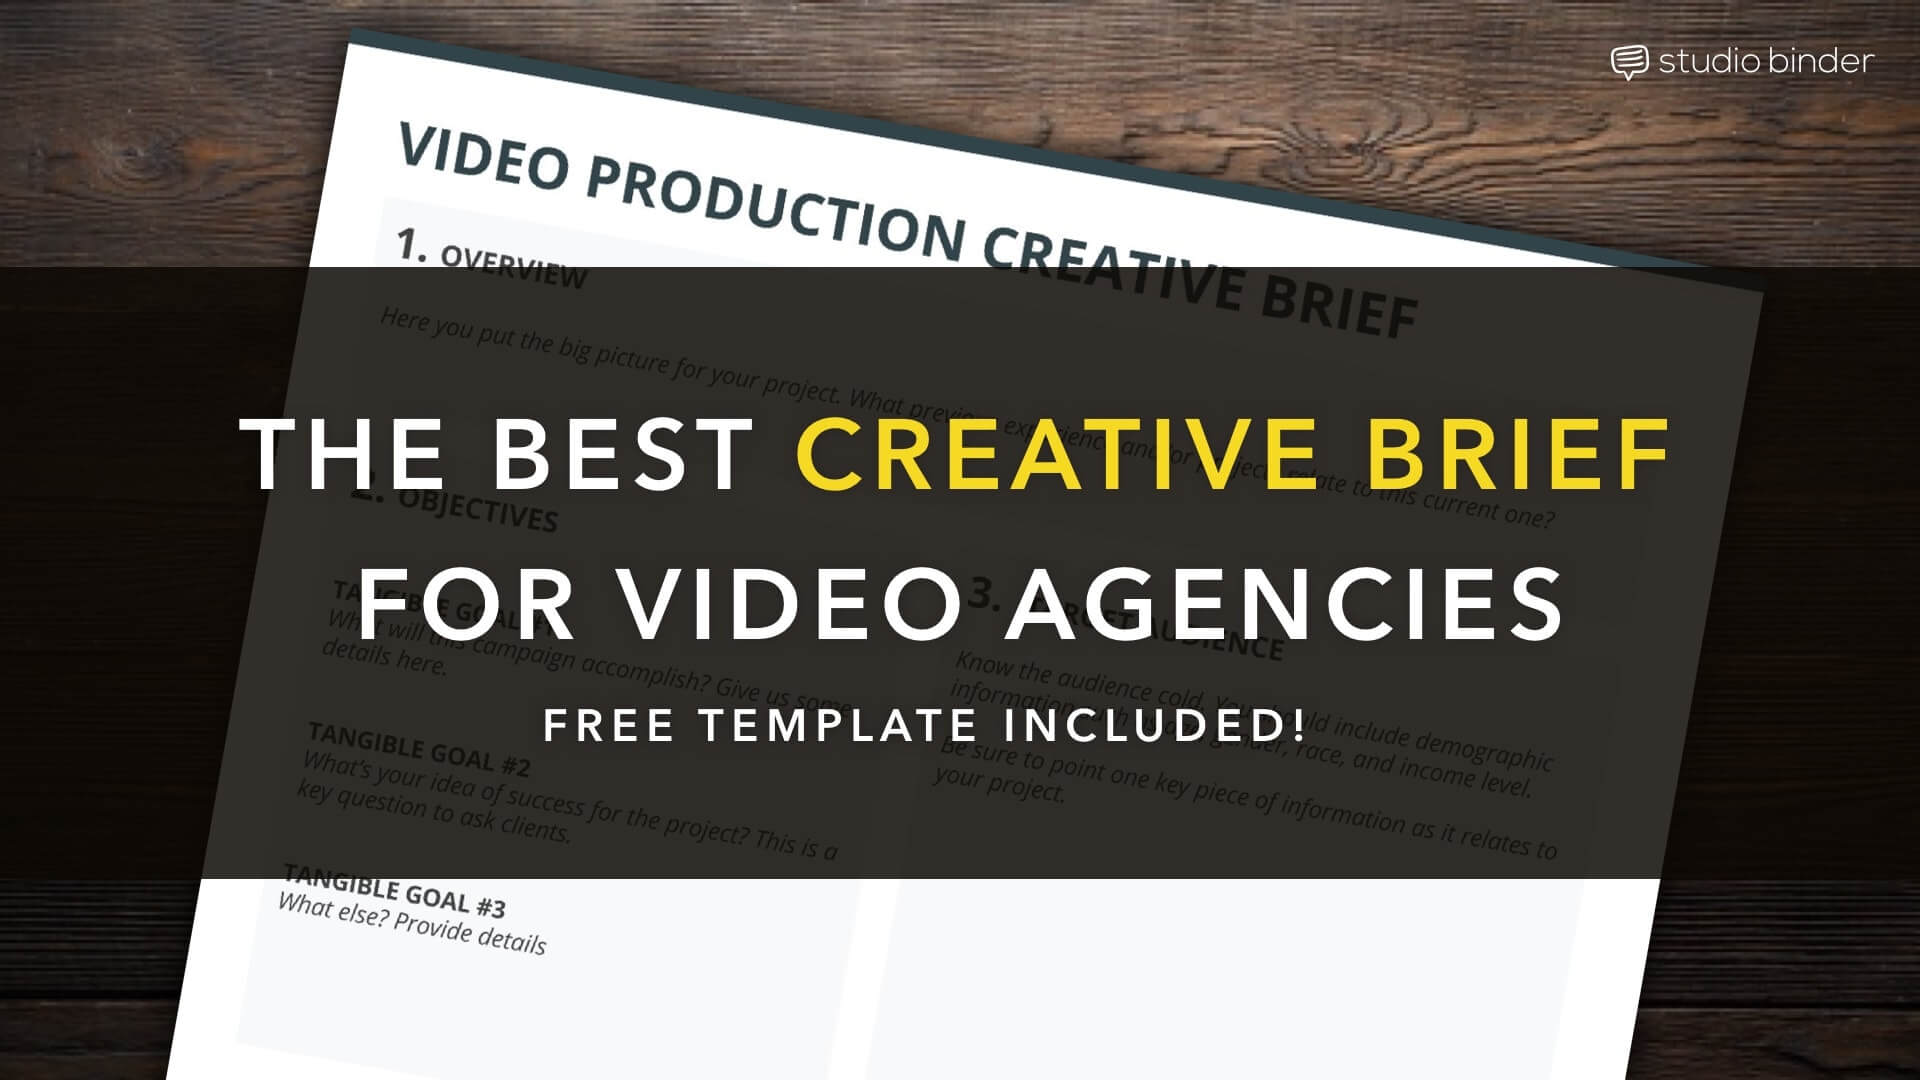 The Best Creative Brief Template For Video Agencies - Free Creative Brief Template Download - StudioBinder@1.5x